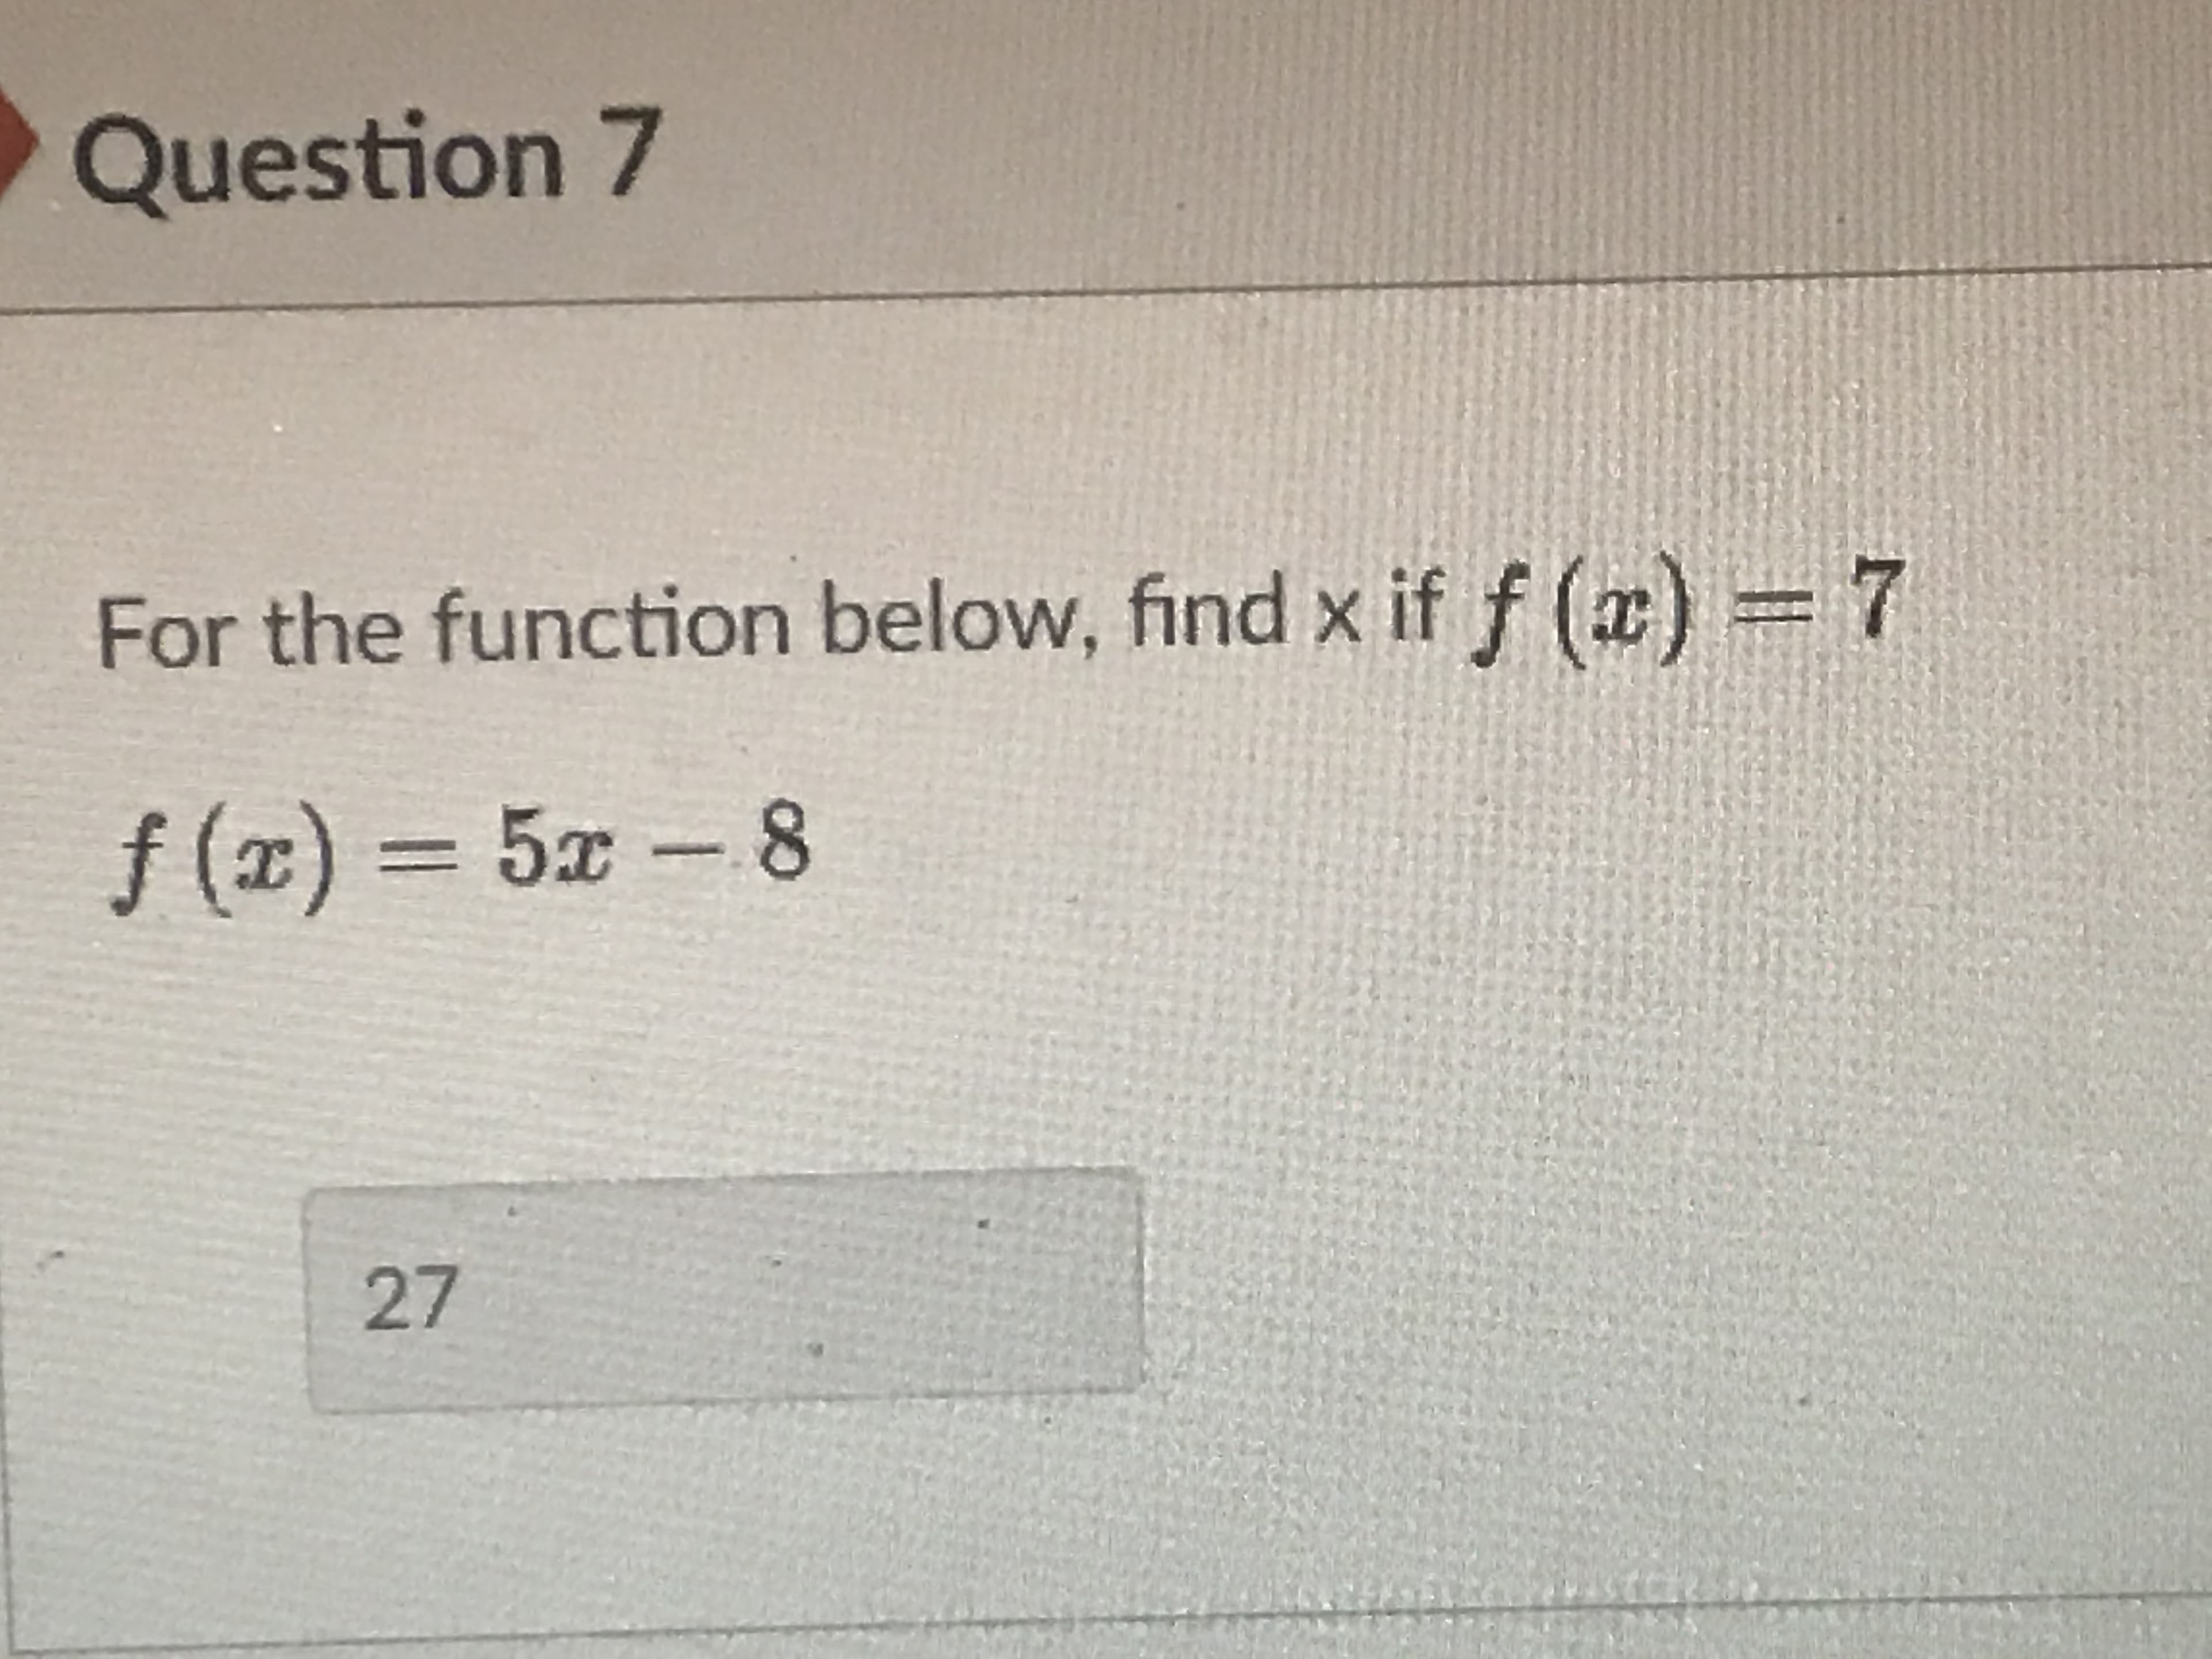 For the function below, find x if f ()= 7
f (x) 3 5x-8
